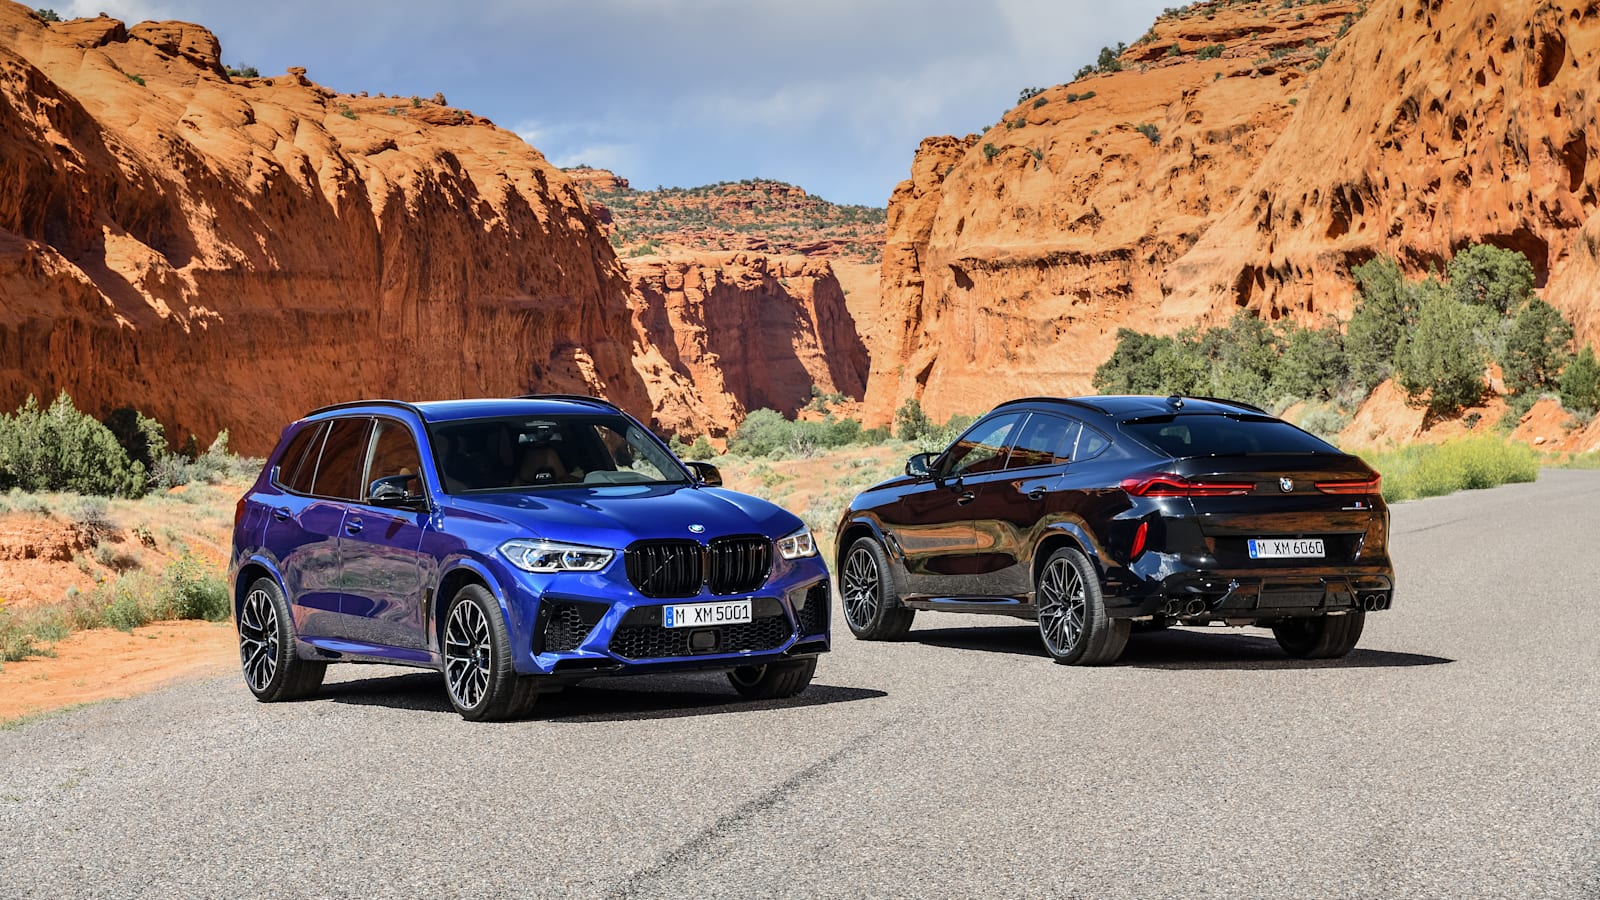 Read our review of the BMW X5 M and X6 M 